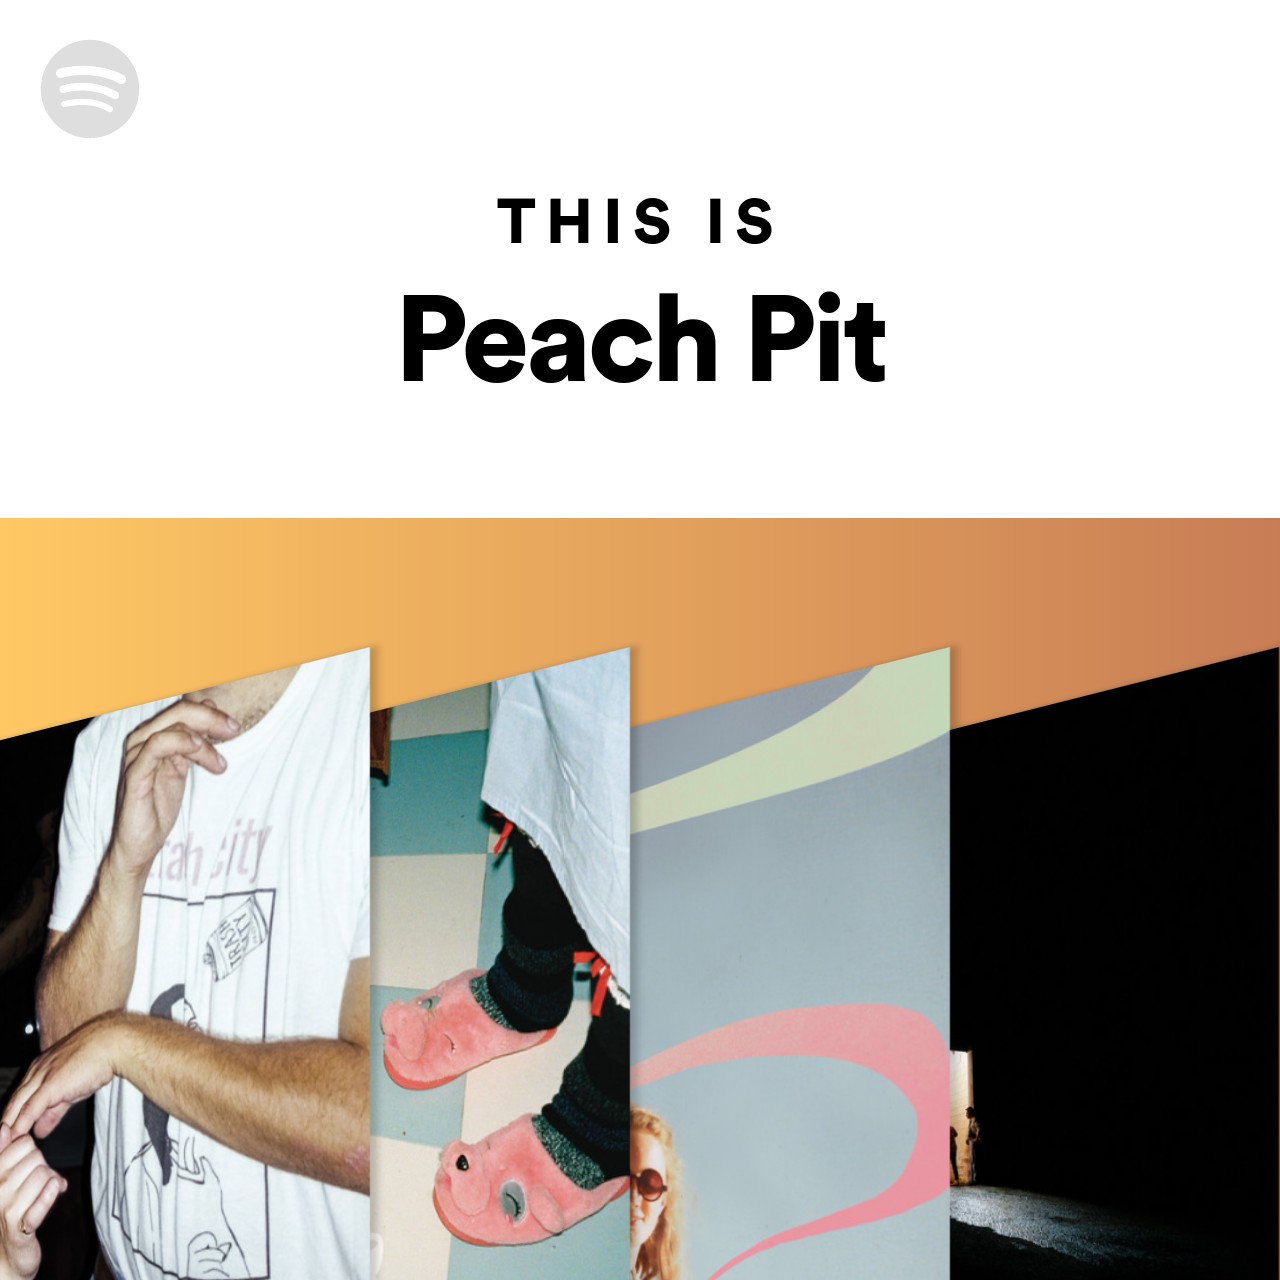 This Is Peach Pit